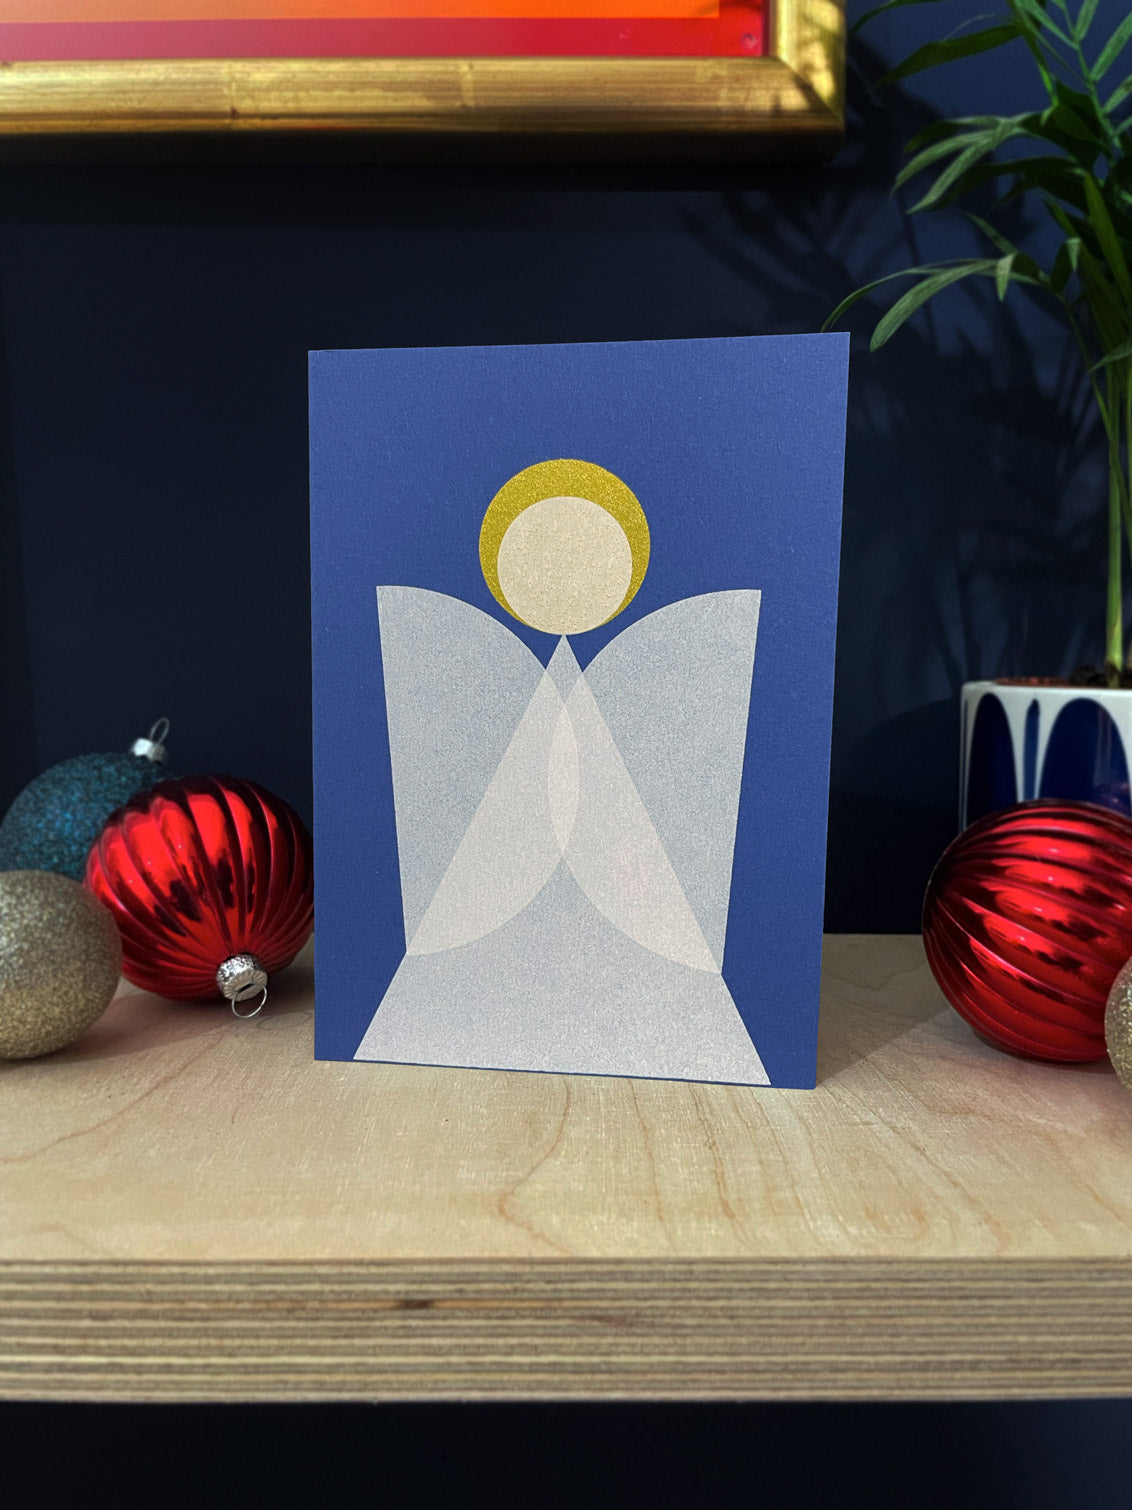 Geometric angel design, blue card, white overlapping wings and a gold halo. Sits on a plywood shelf with baubles and foliage about.